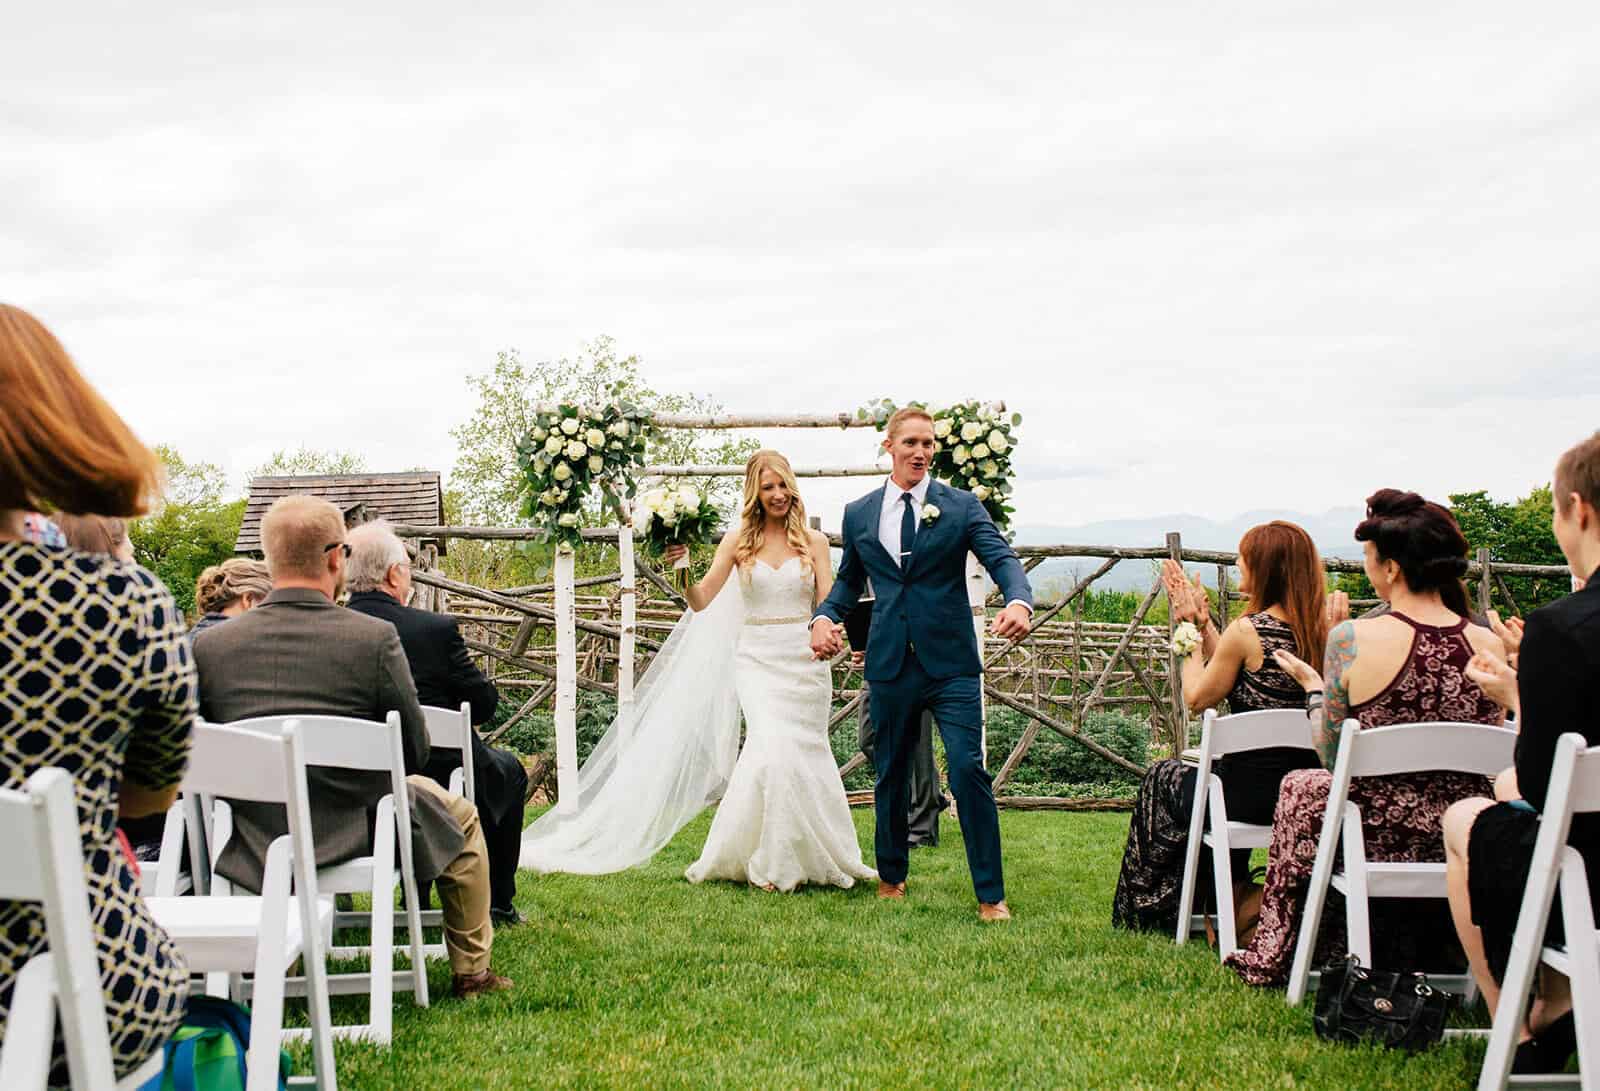 Couple walking down the aisle with mountains in background